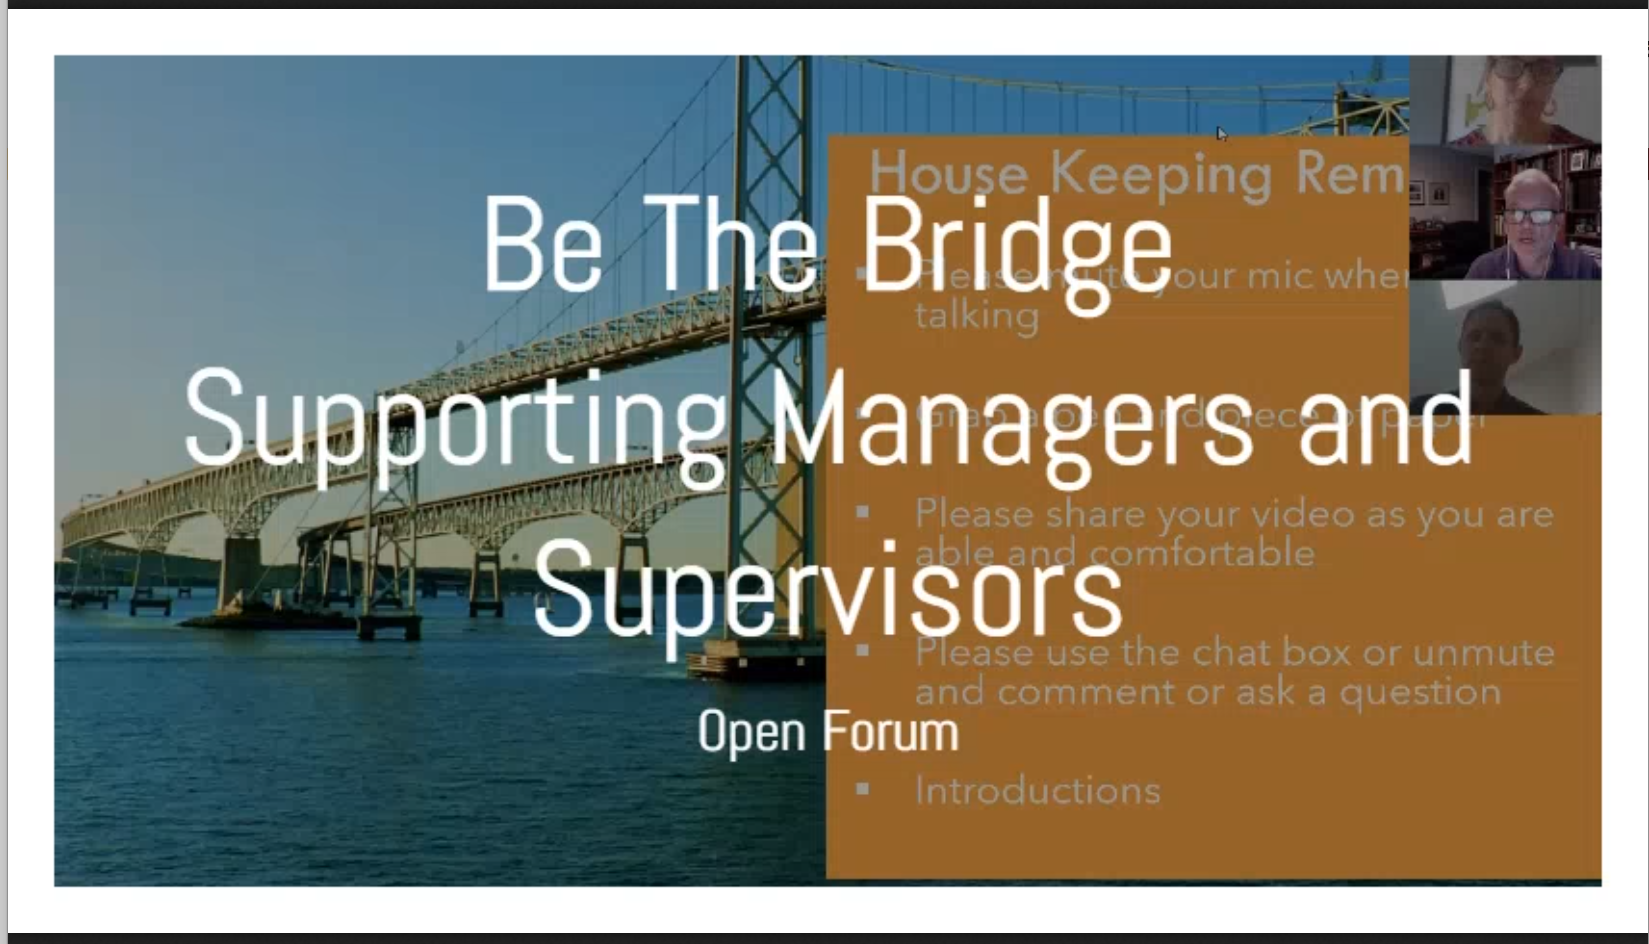 Be the Bridge: Supporting Managers and Supervisors Open Forum